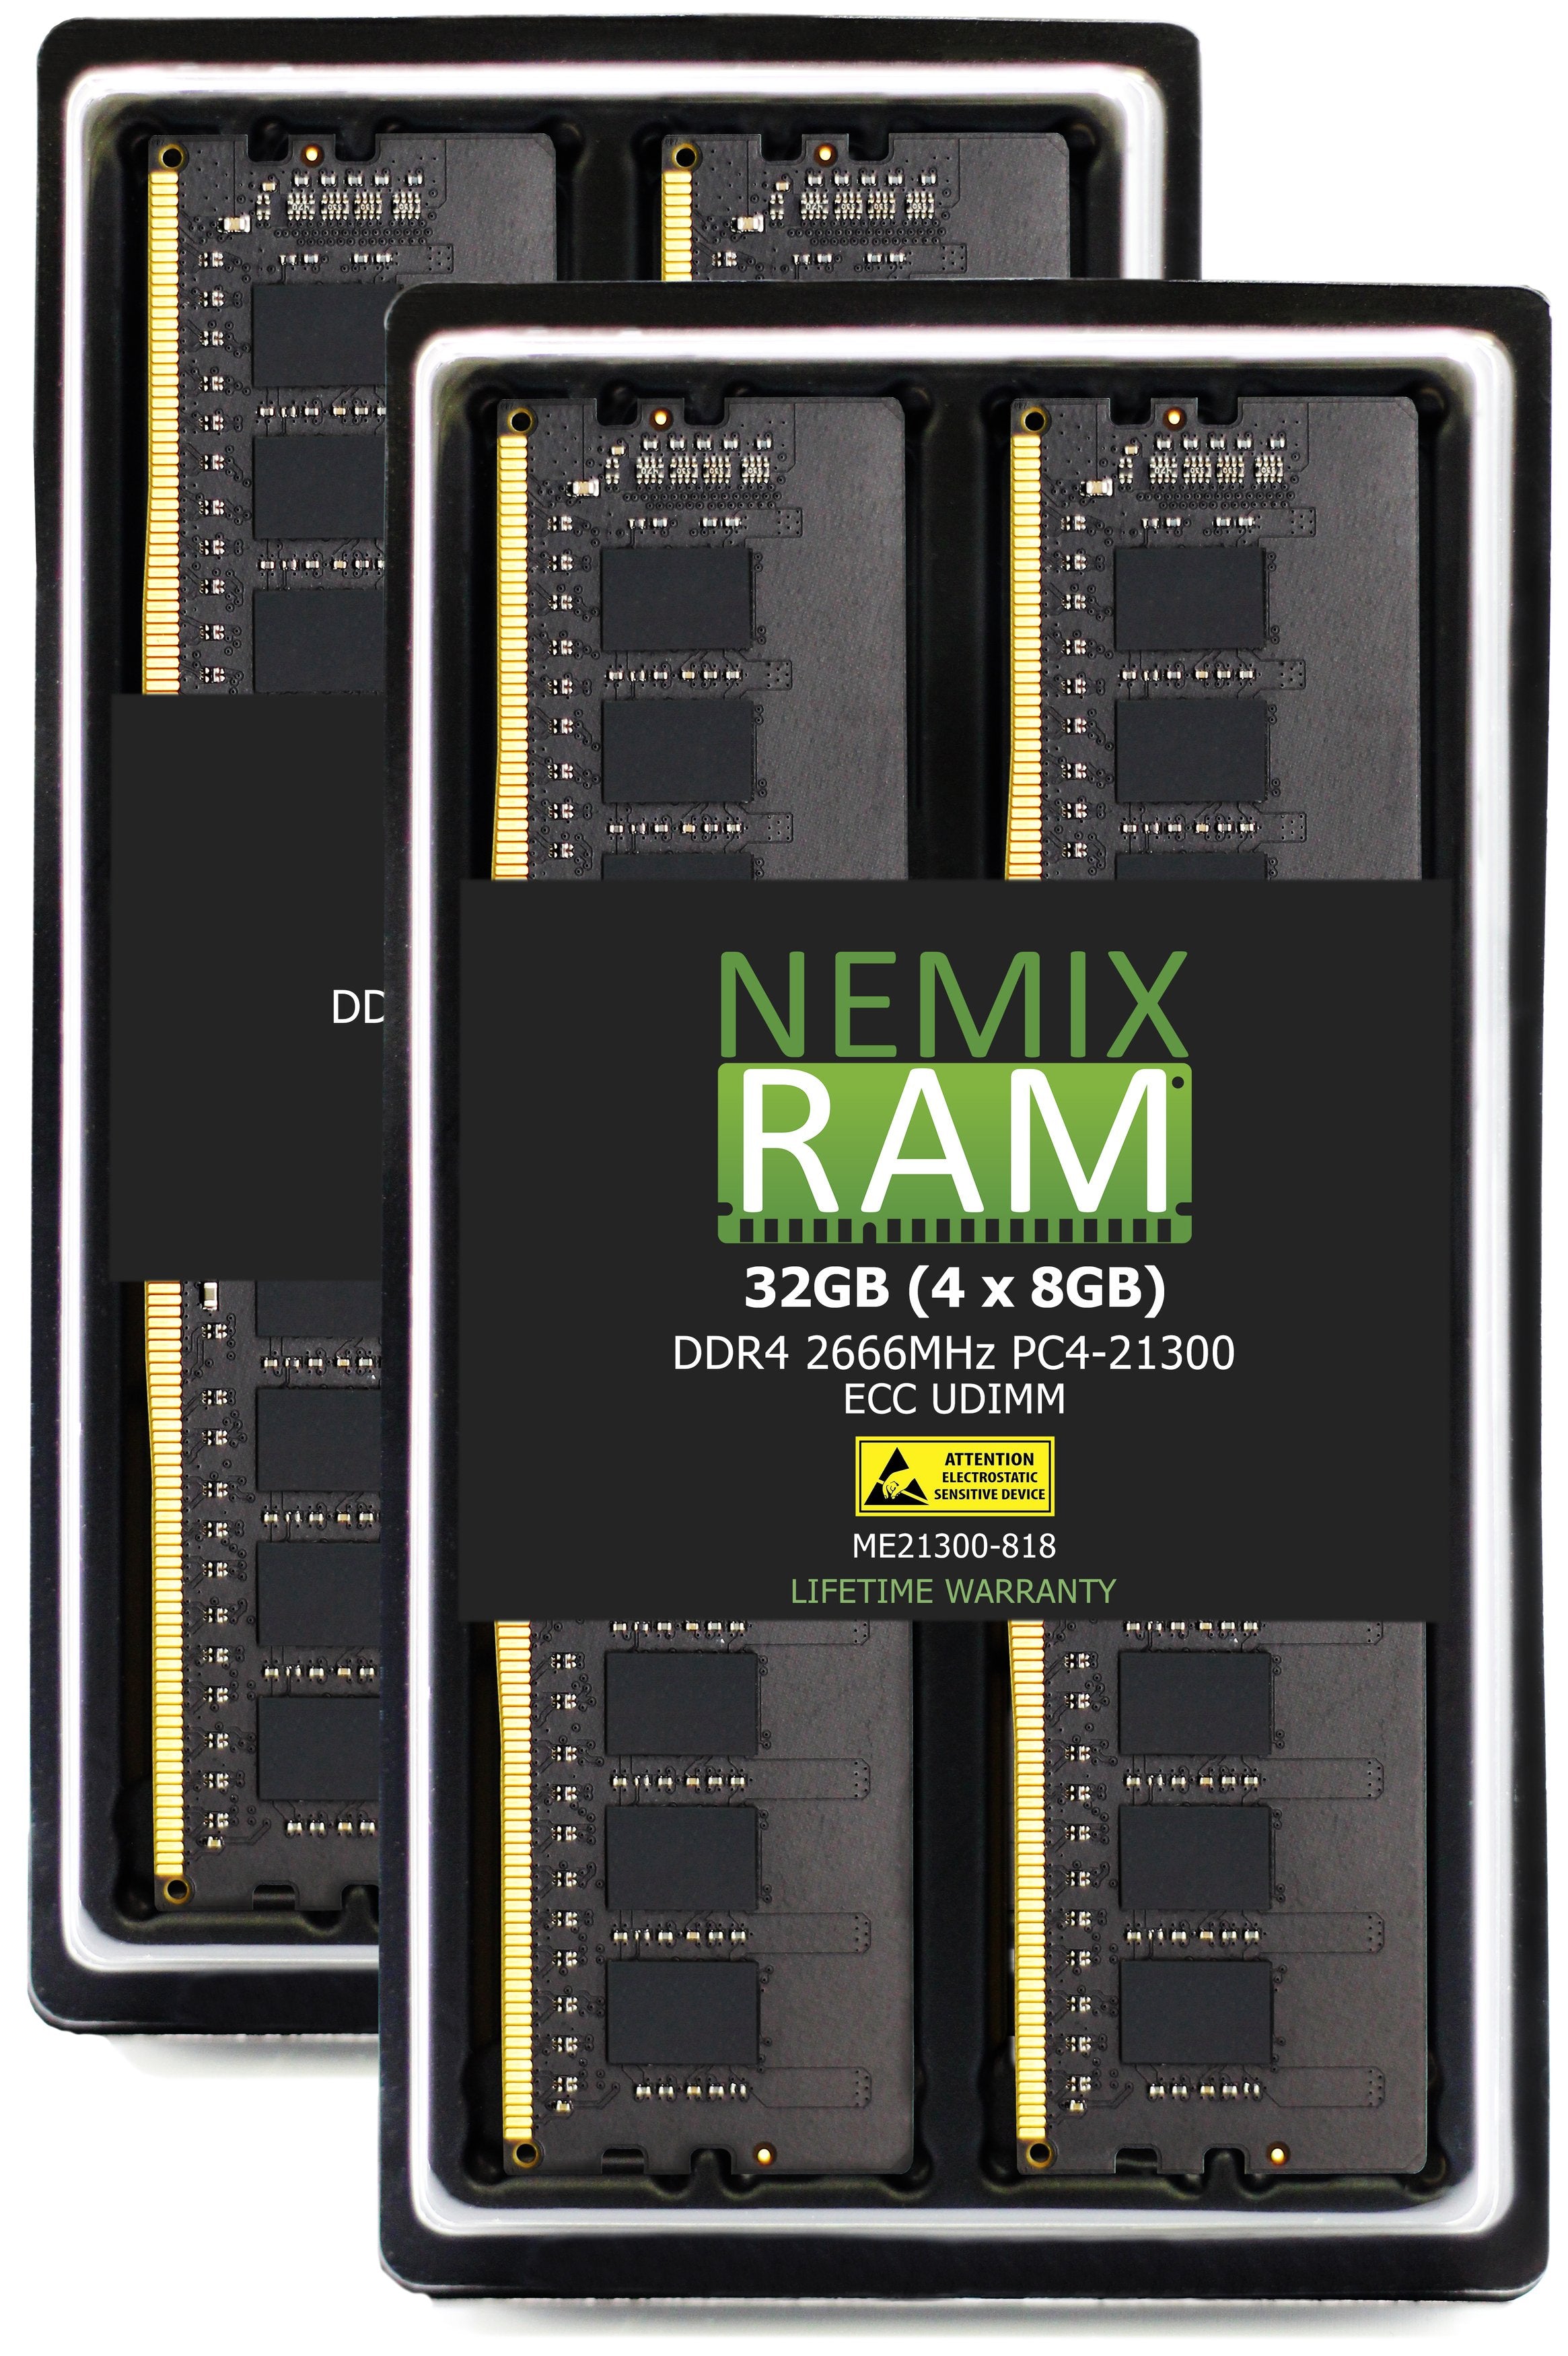 DDR4 2666MHZ PC4-21300 ECC UDIMM Compatible with Synology D4EC-2666-8G